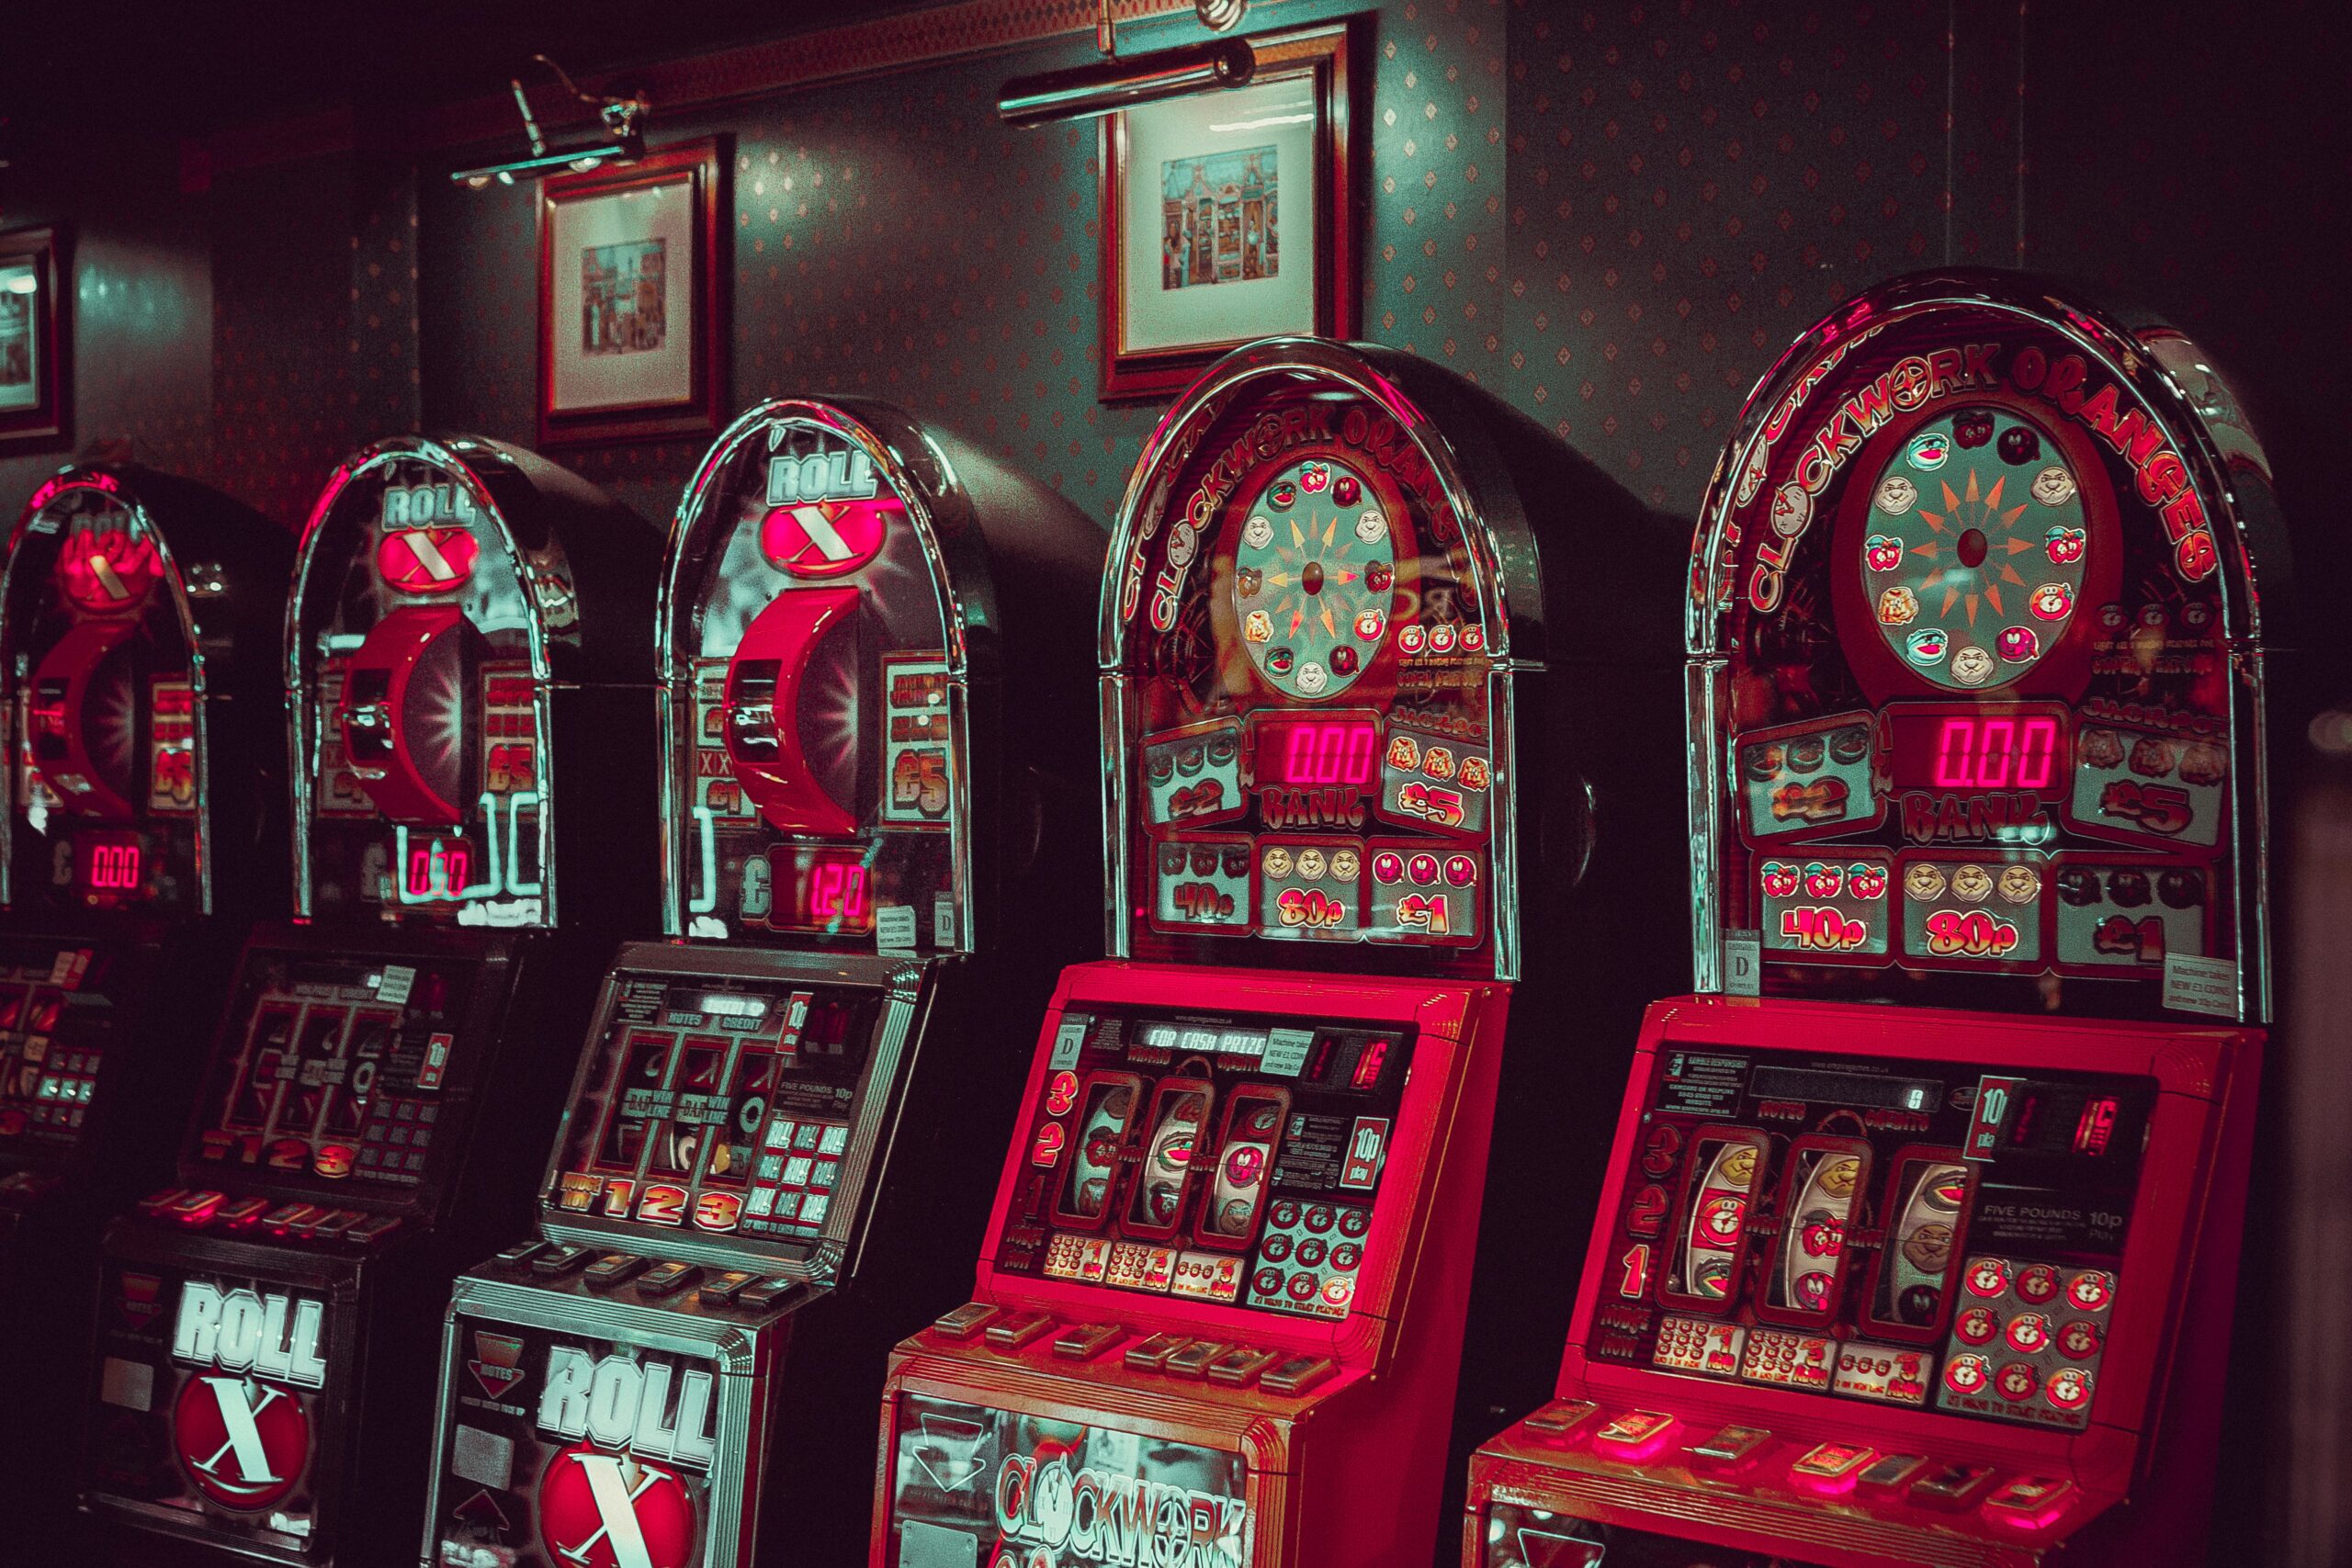 Why Are Arcade Machines So Expensive?